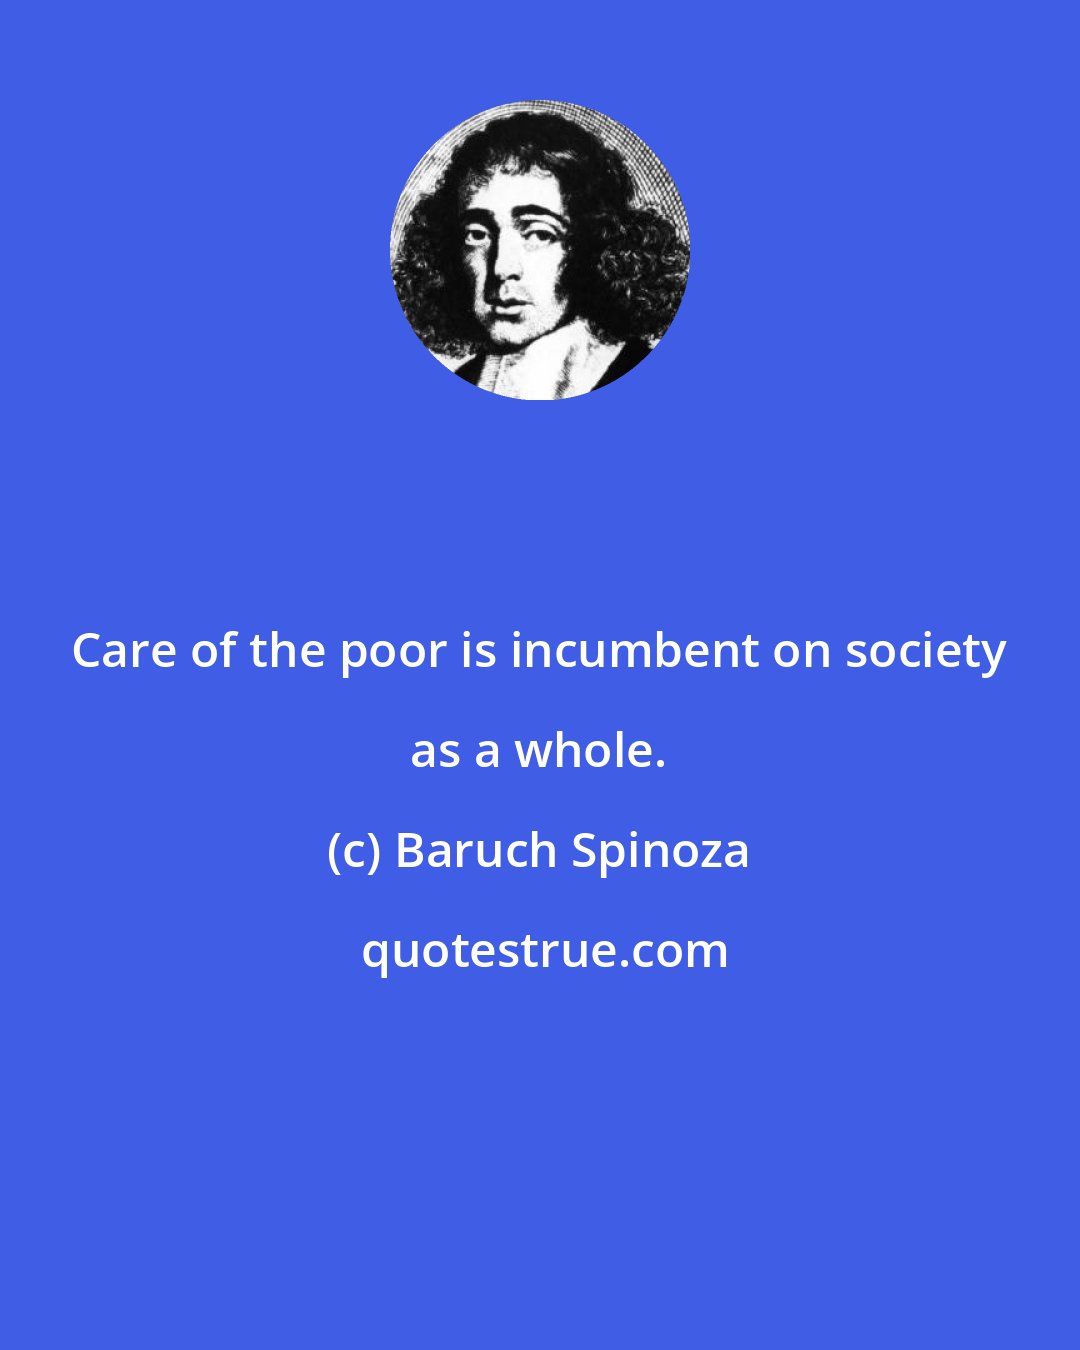 Baruch Spinoza: Care of the poor is incumbent on society as a whole.